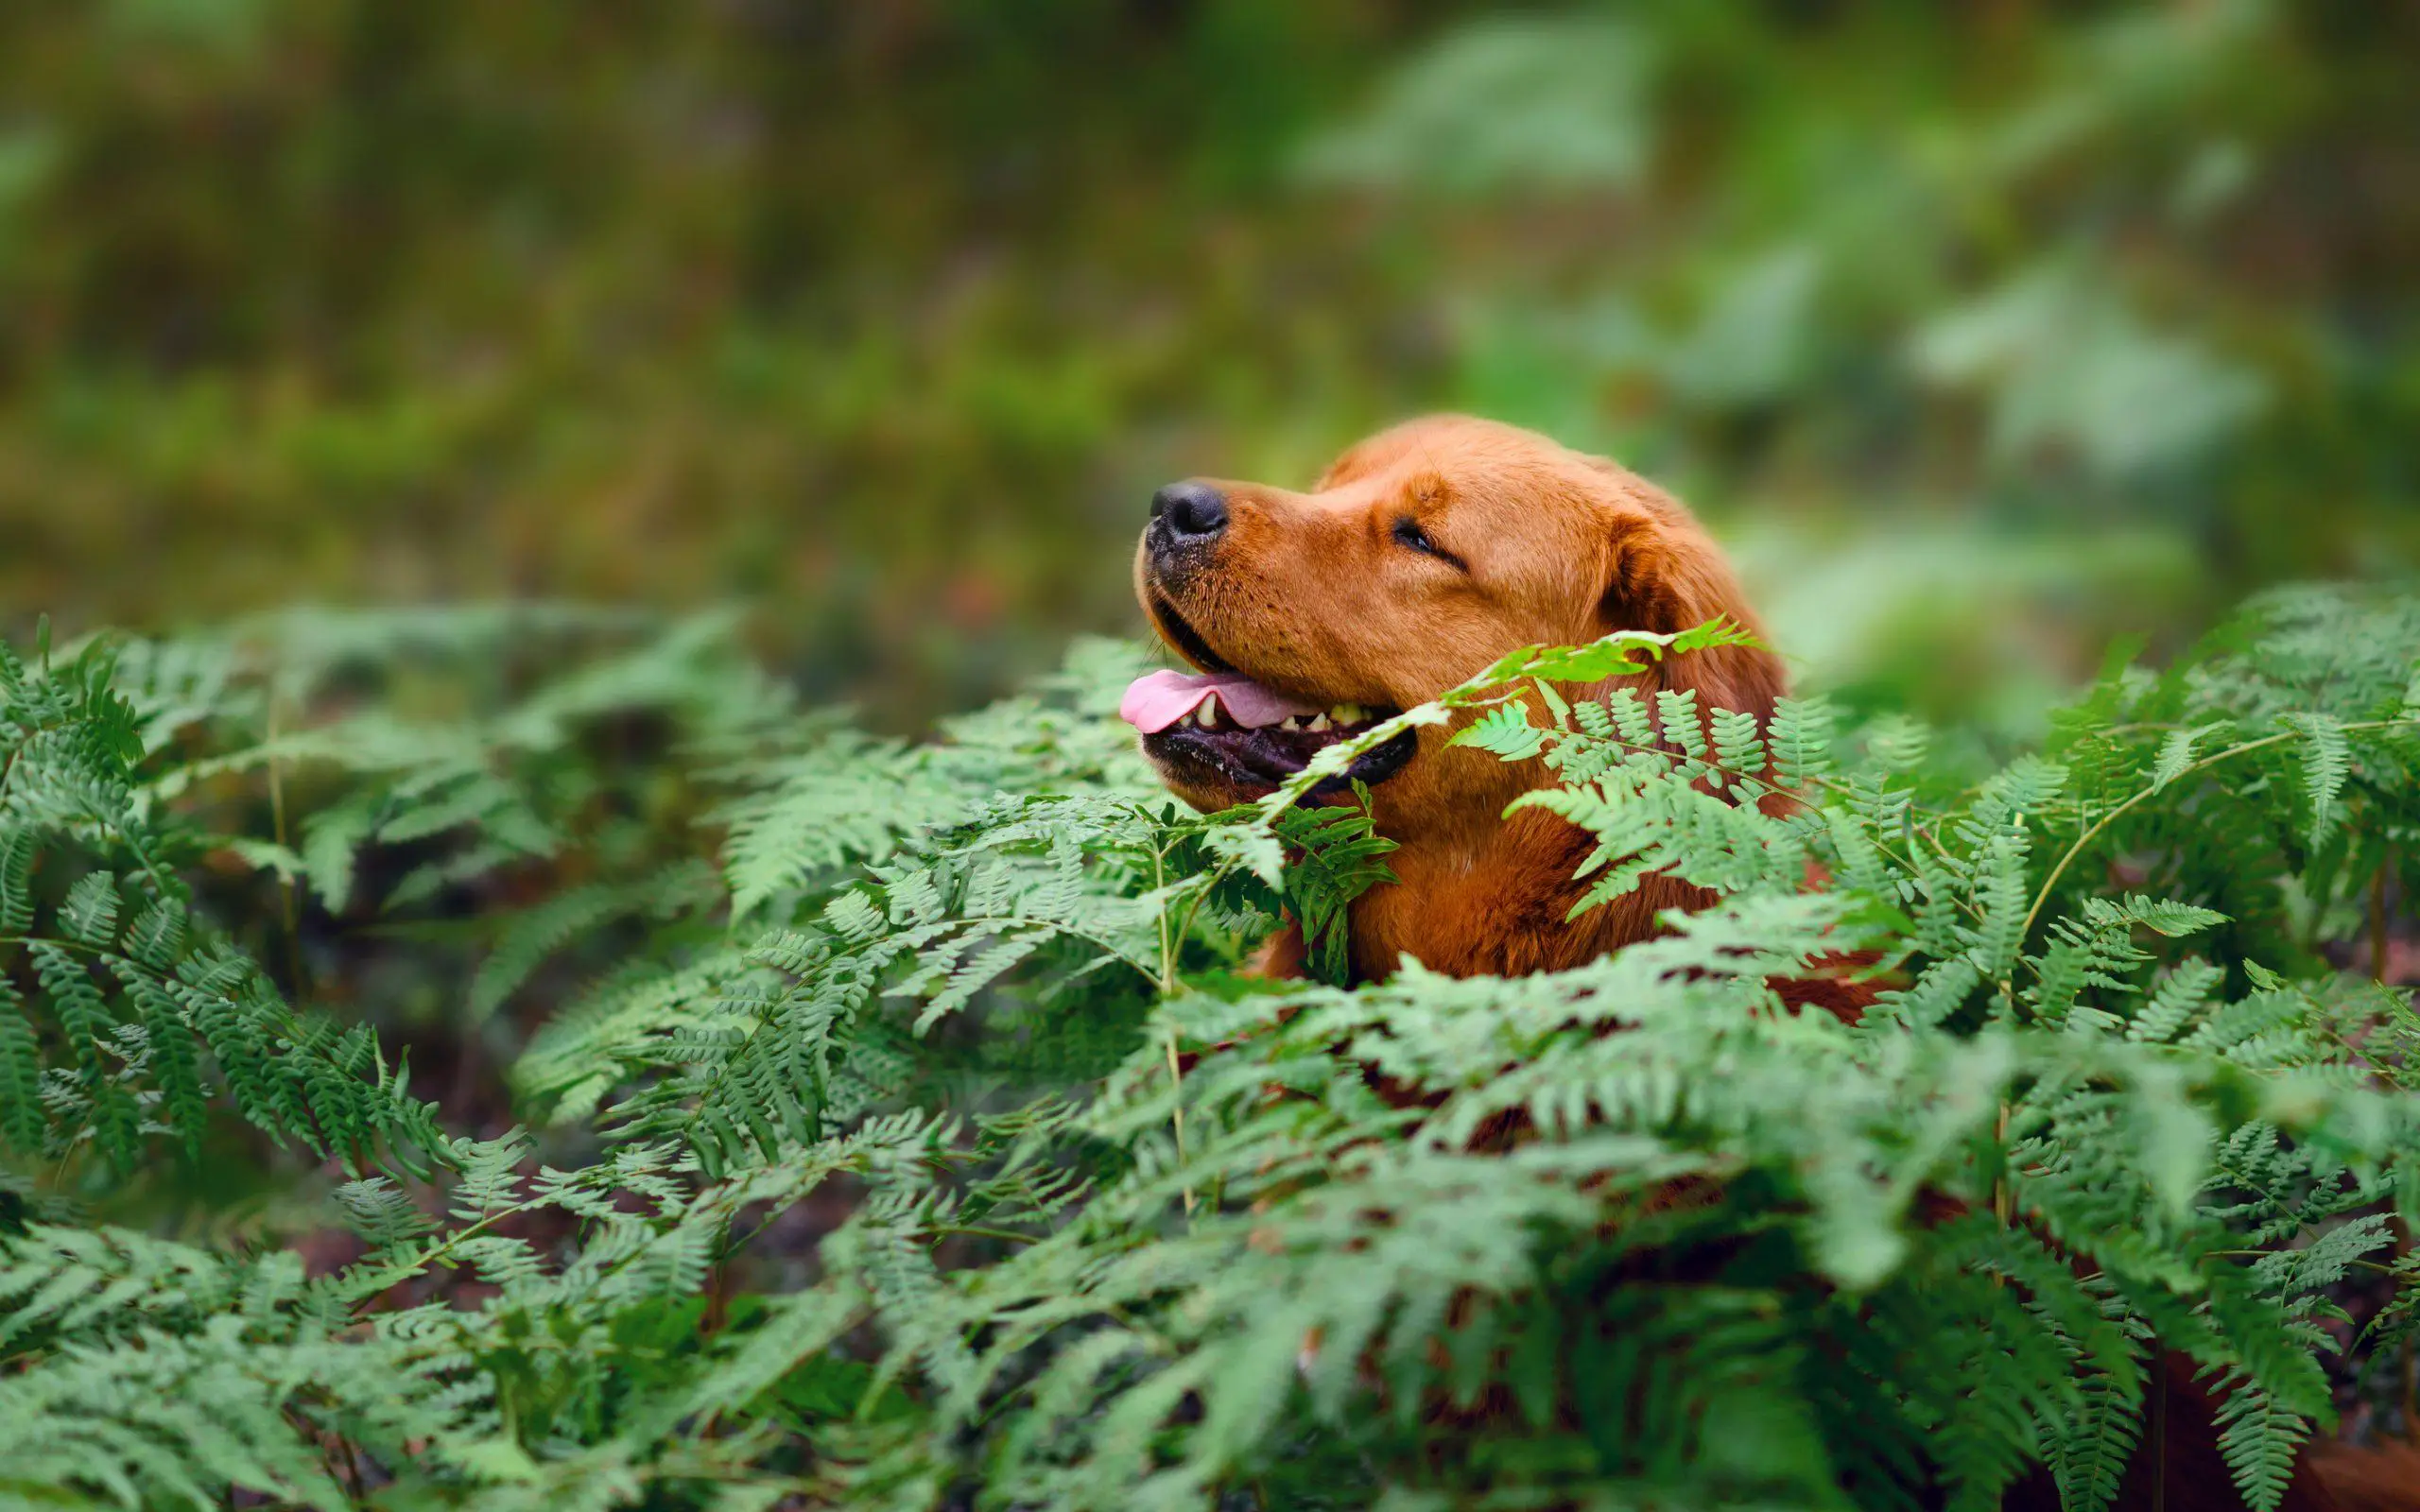 The dog sits among the ferns in the forest and enjoys the fresh air